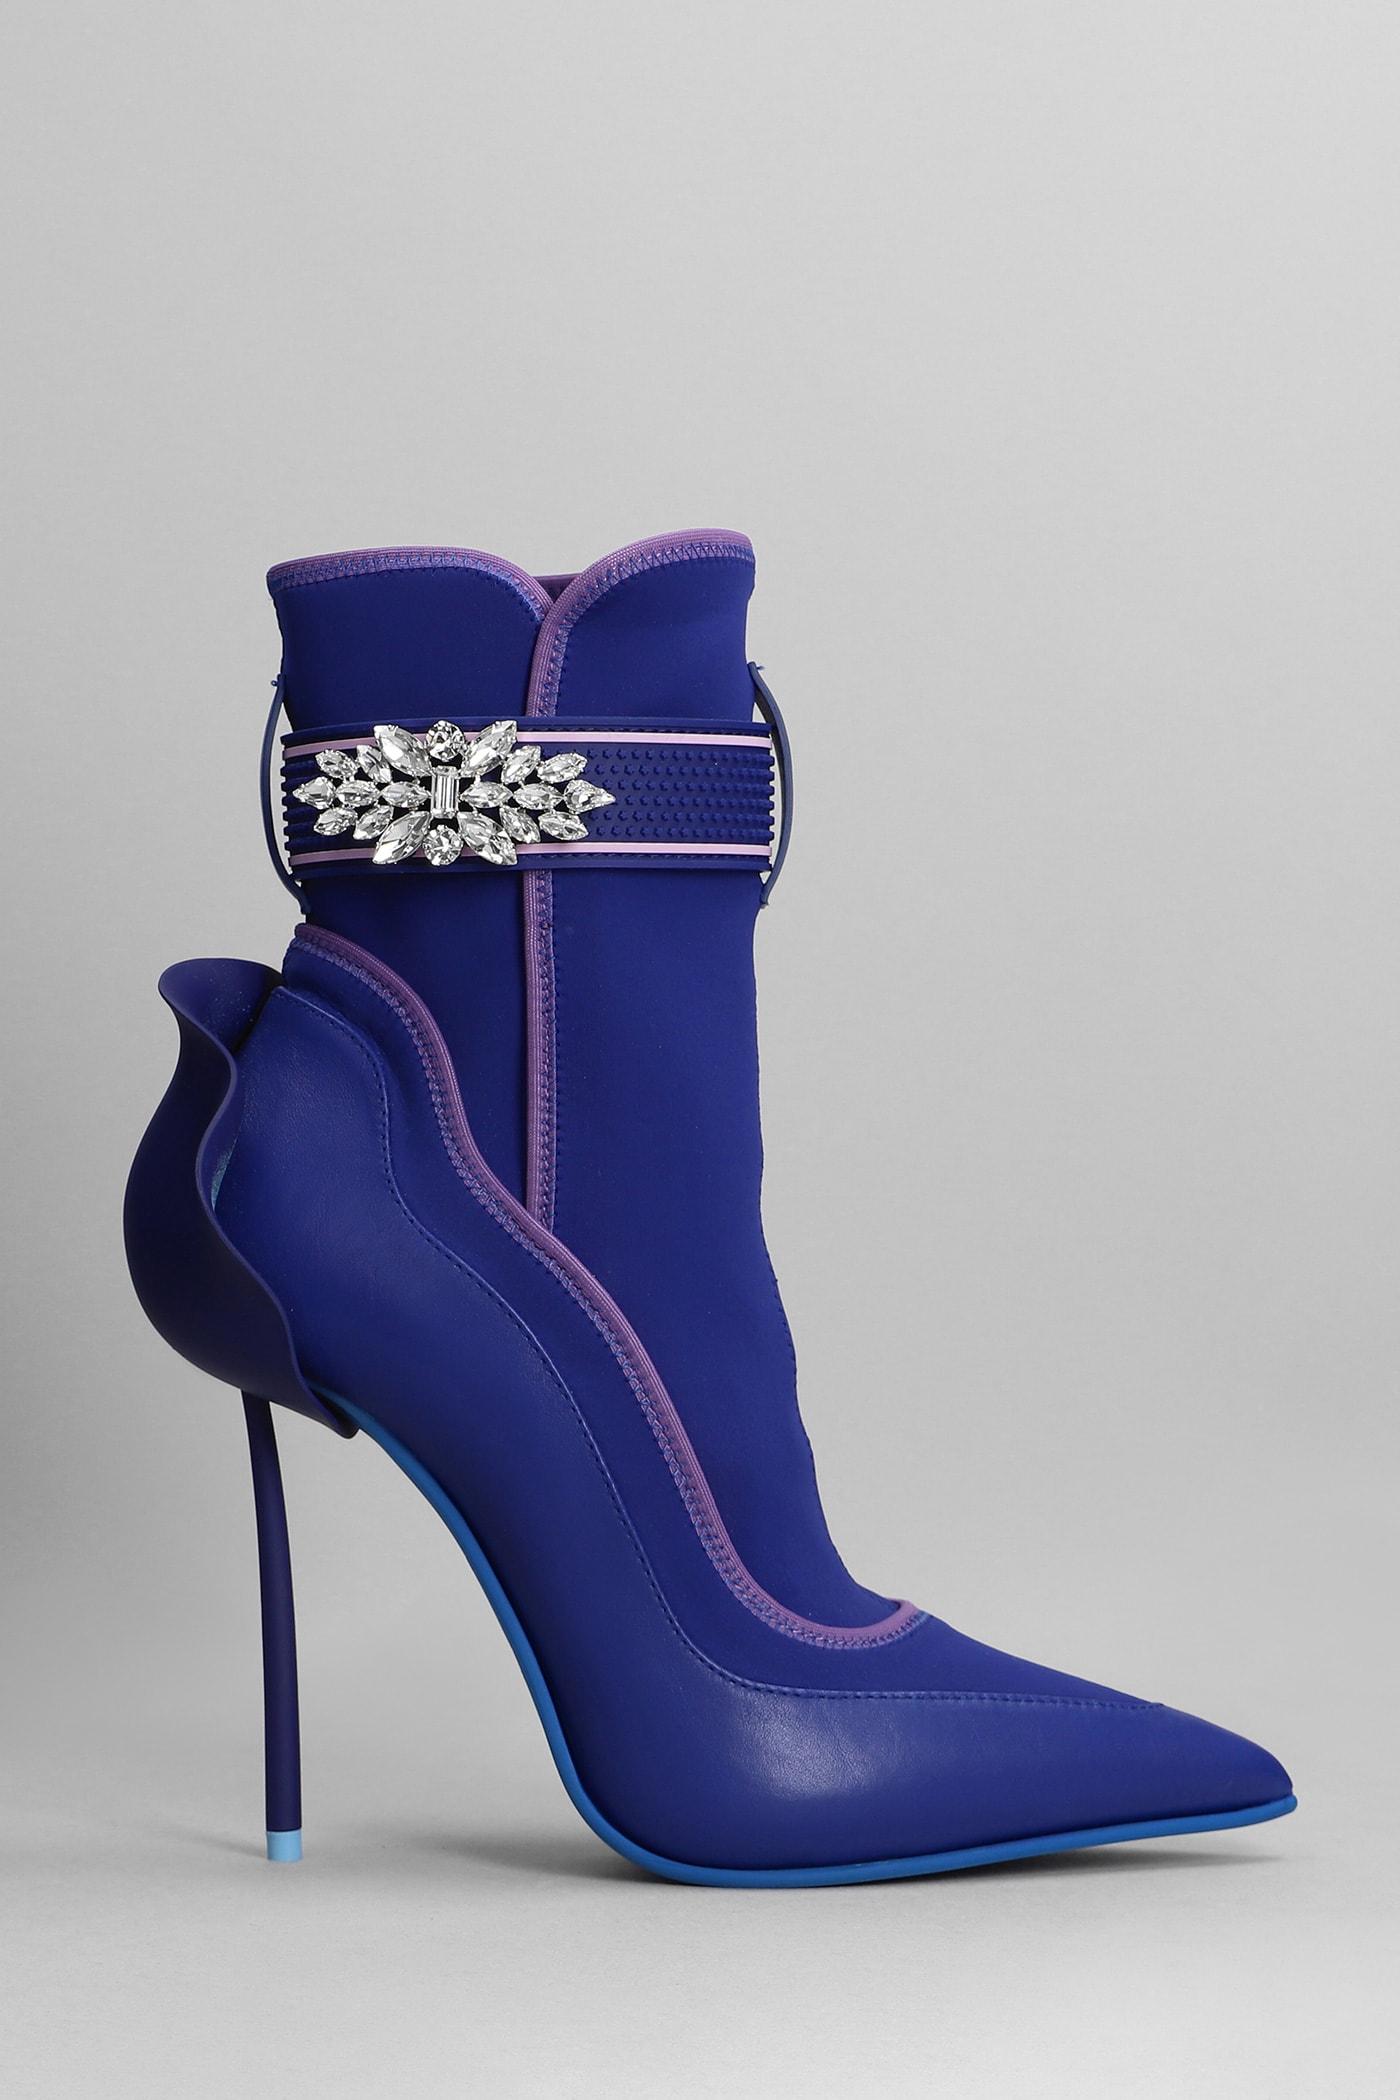 Le Silla High Heels Ankle Boots In Blue Leather